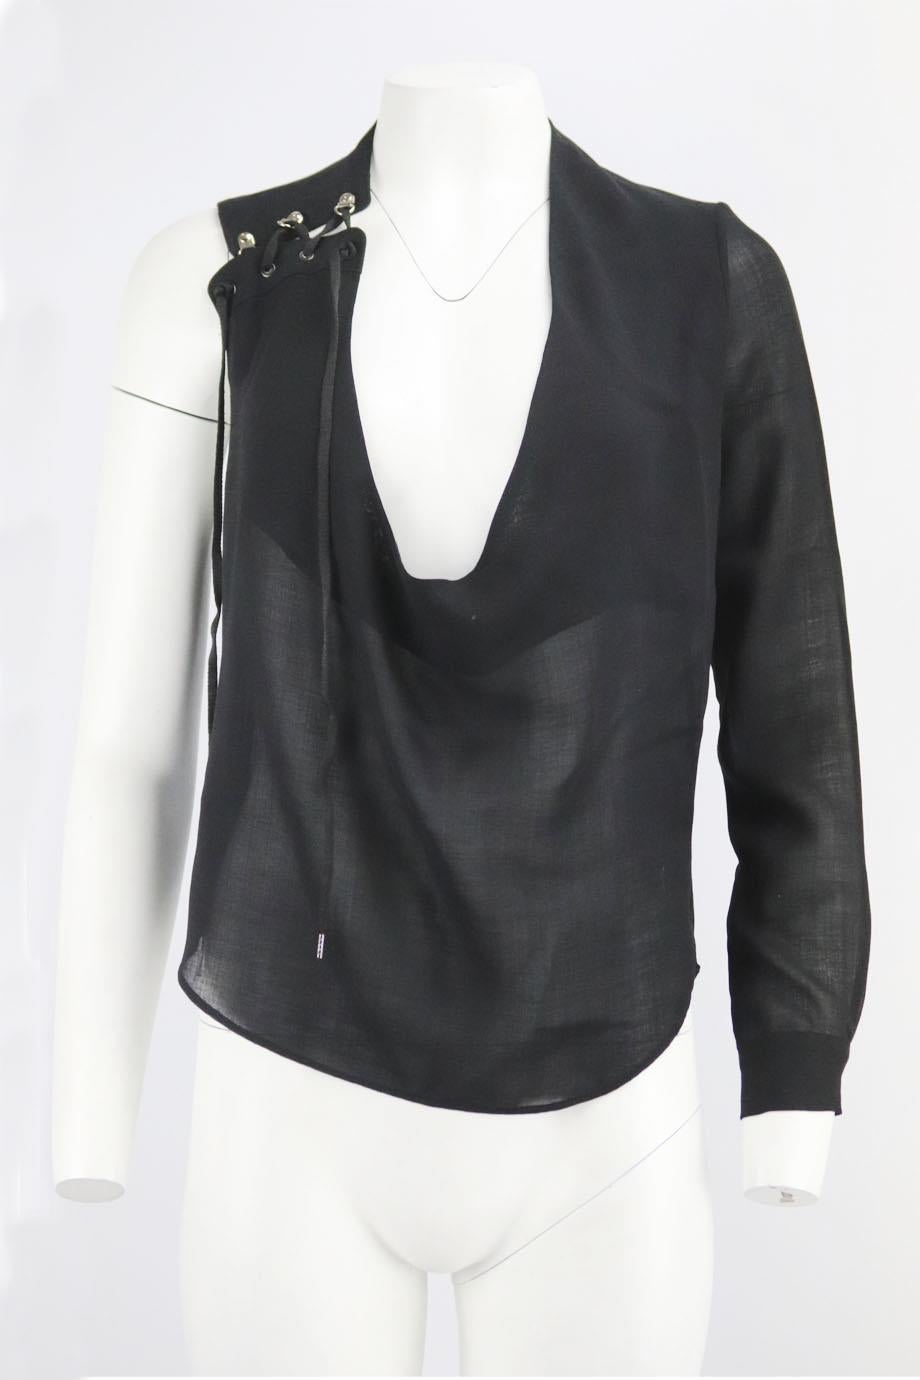 Anthony Vaccarello lace up wool blend top. Black. Long sleeve, scoop neck. Slips on. 80% Wool, 20% polyester; fabric2: 100% leather; trim: 100% zamac. Size: FR 36 (UK 8, US 4, IT 40). Bust: 35 in. Waist: 33 in. Hips: 36 in. Length: 24 in
